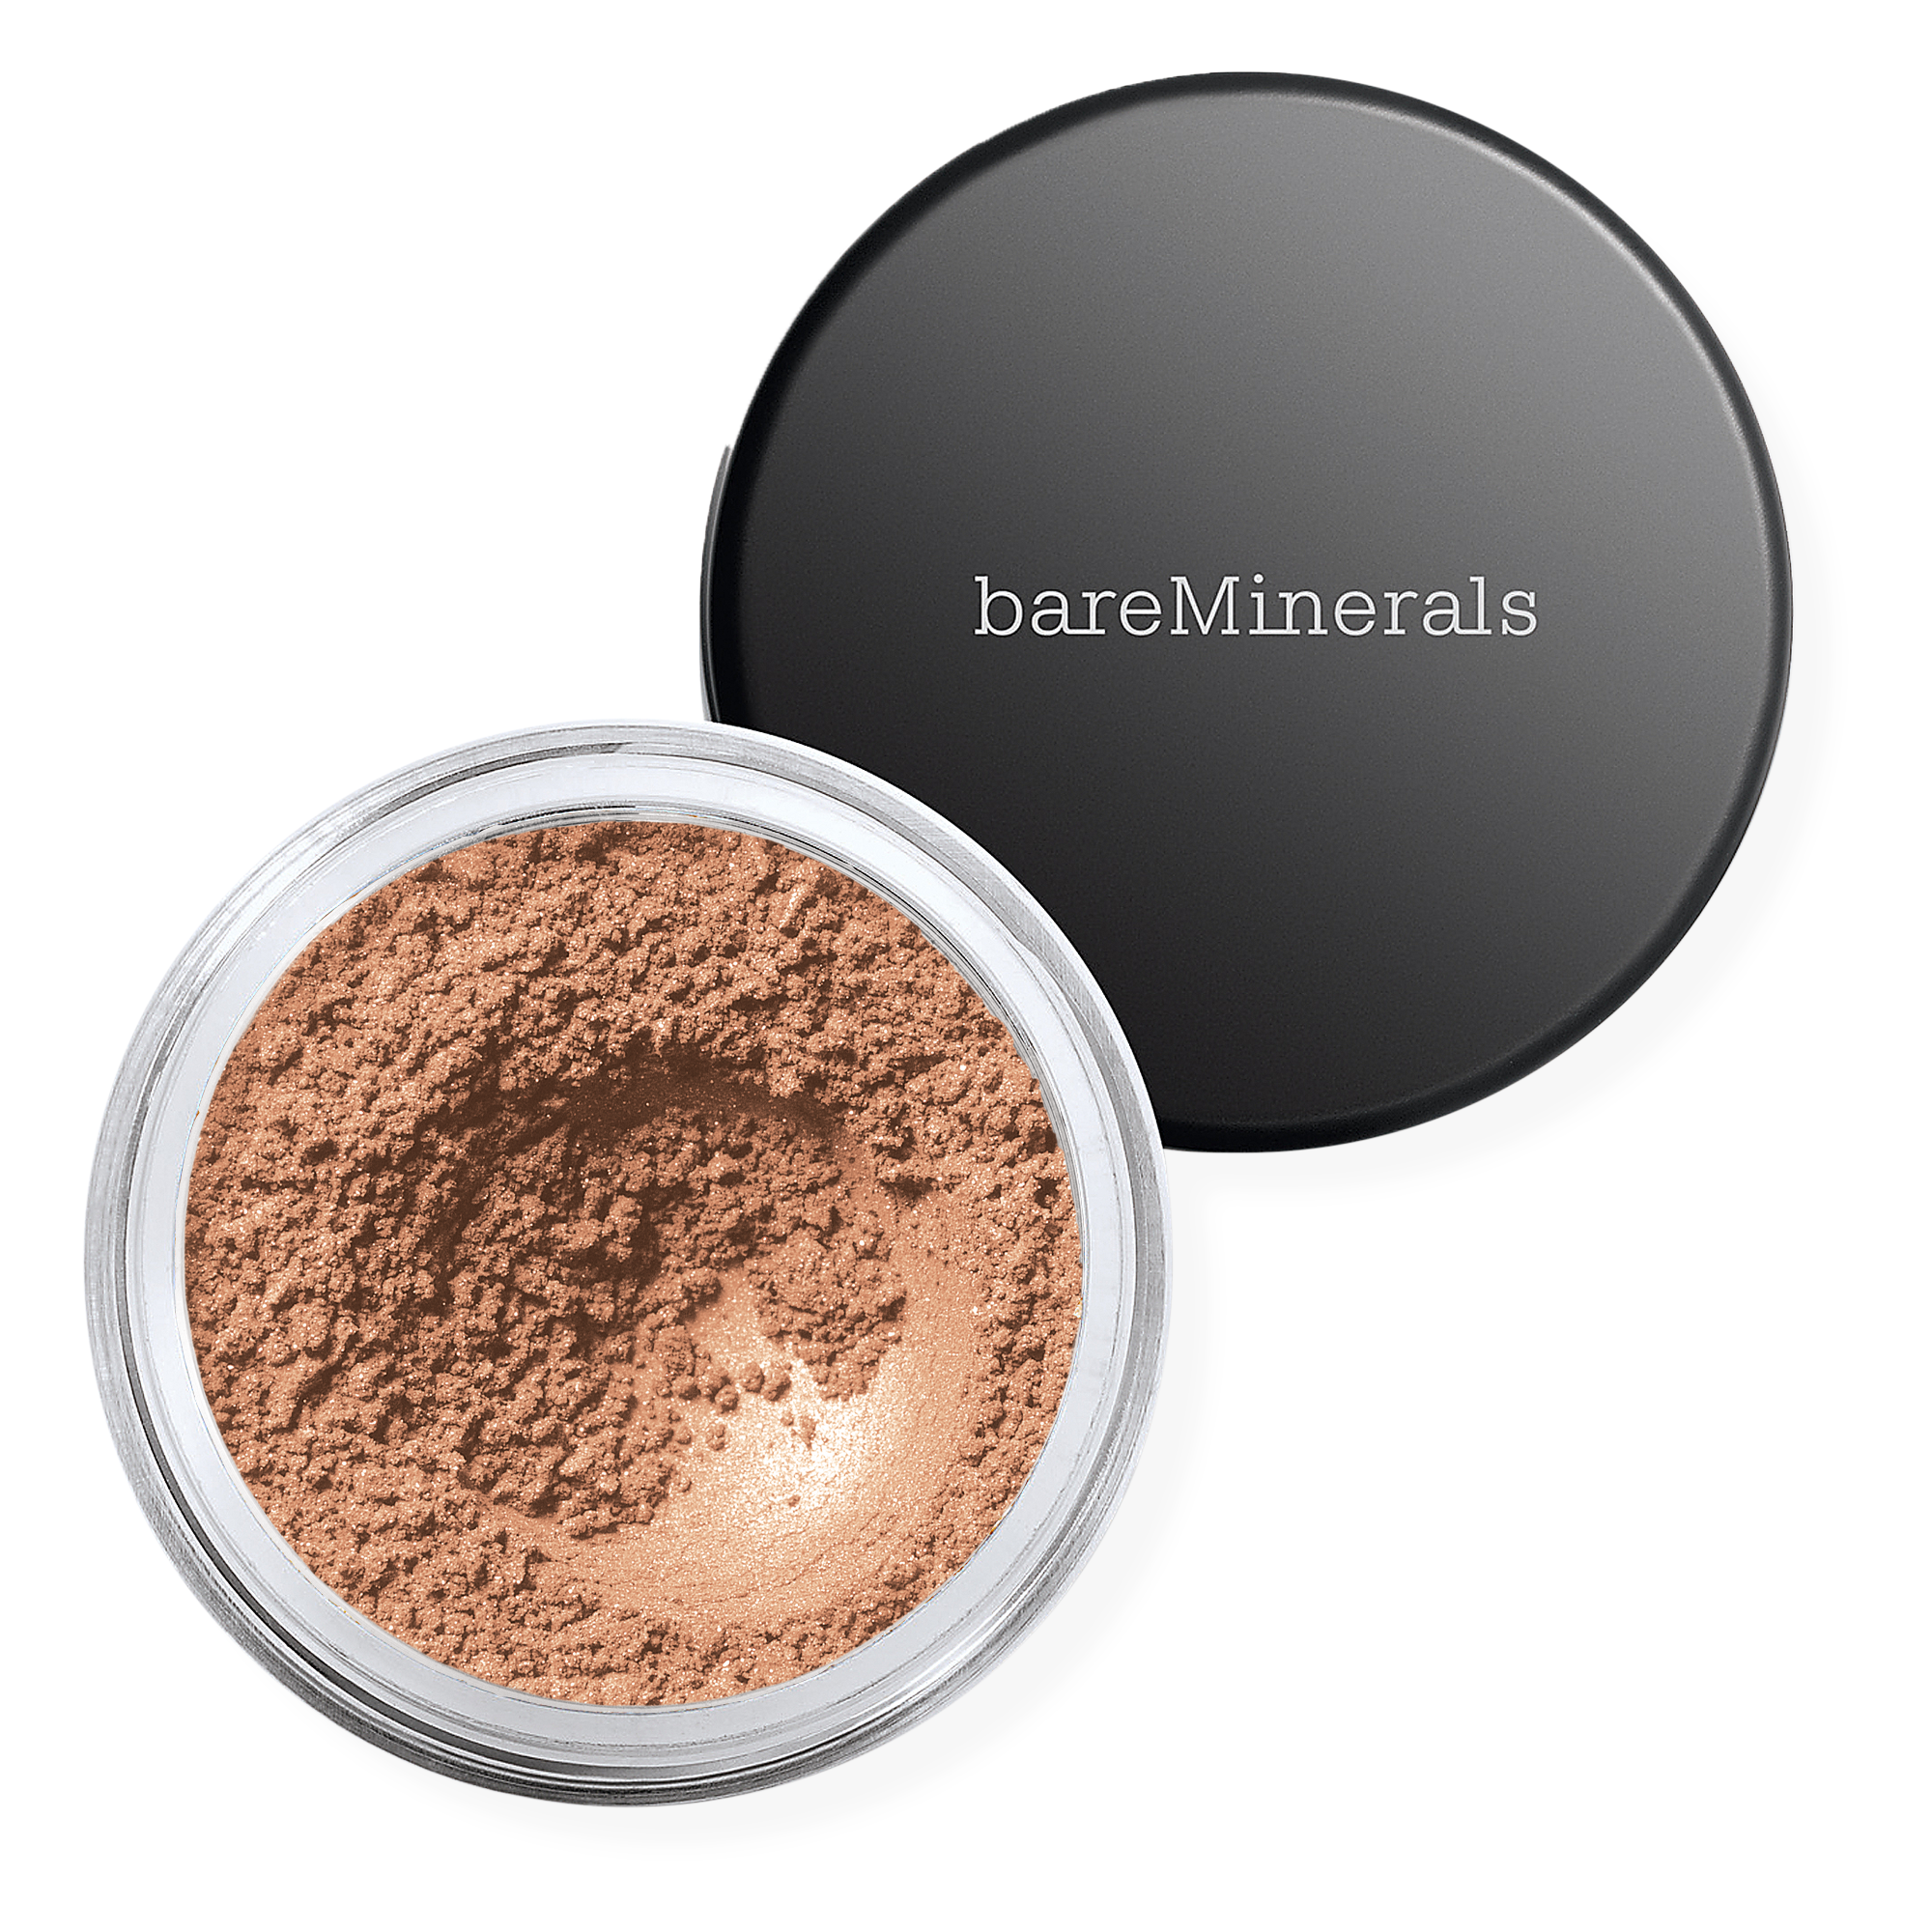 bareMinerals Loose Mineral Eyecolor / PEBBLE